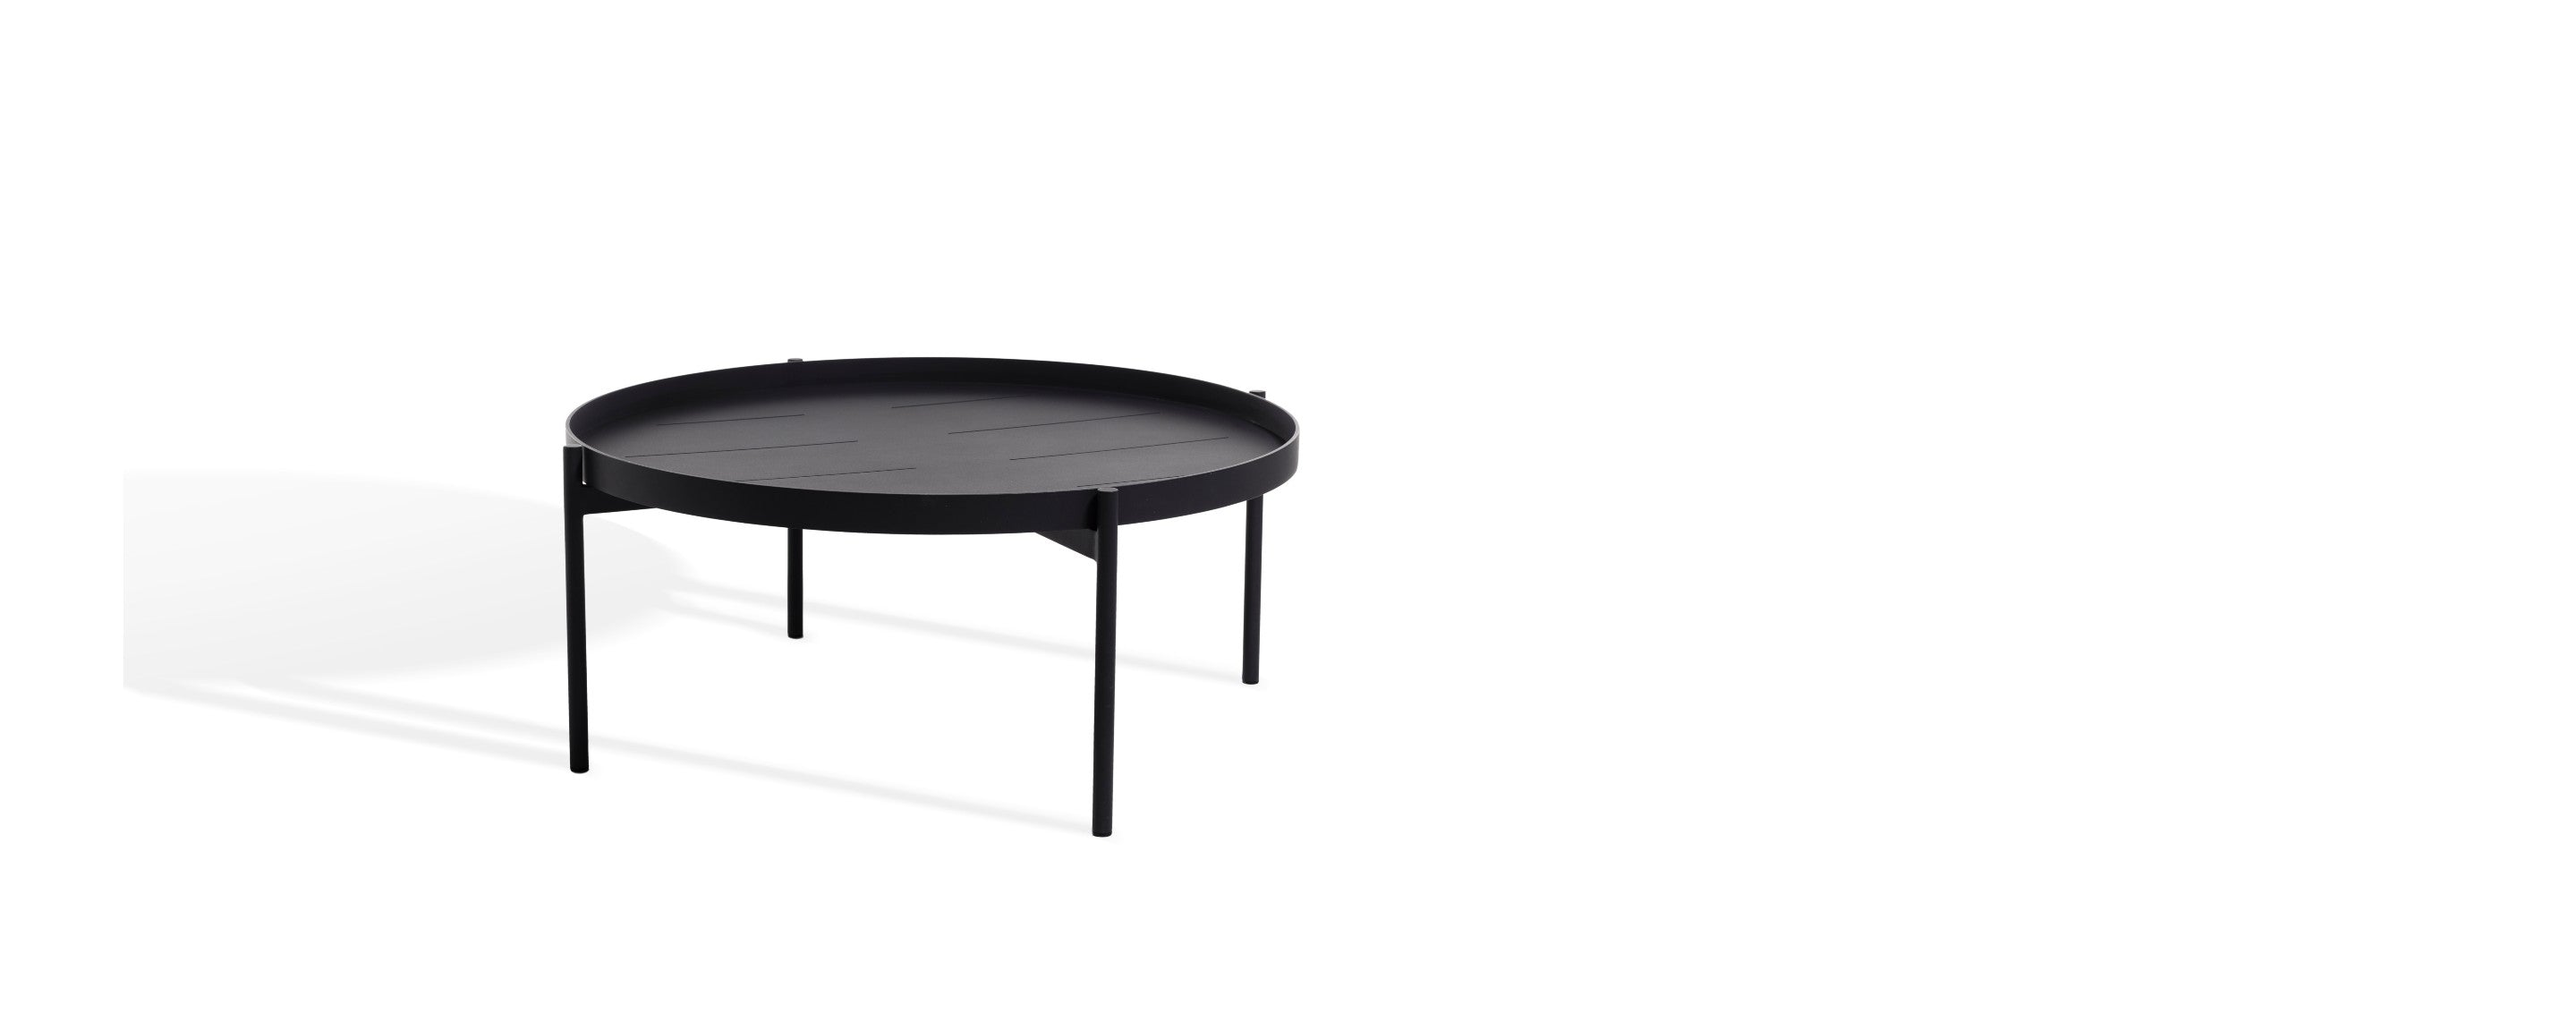 the salto large lounge table